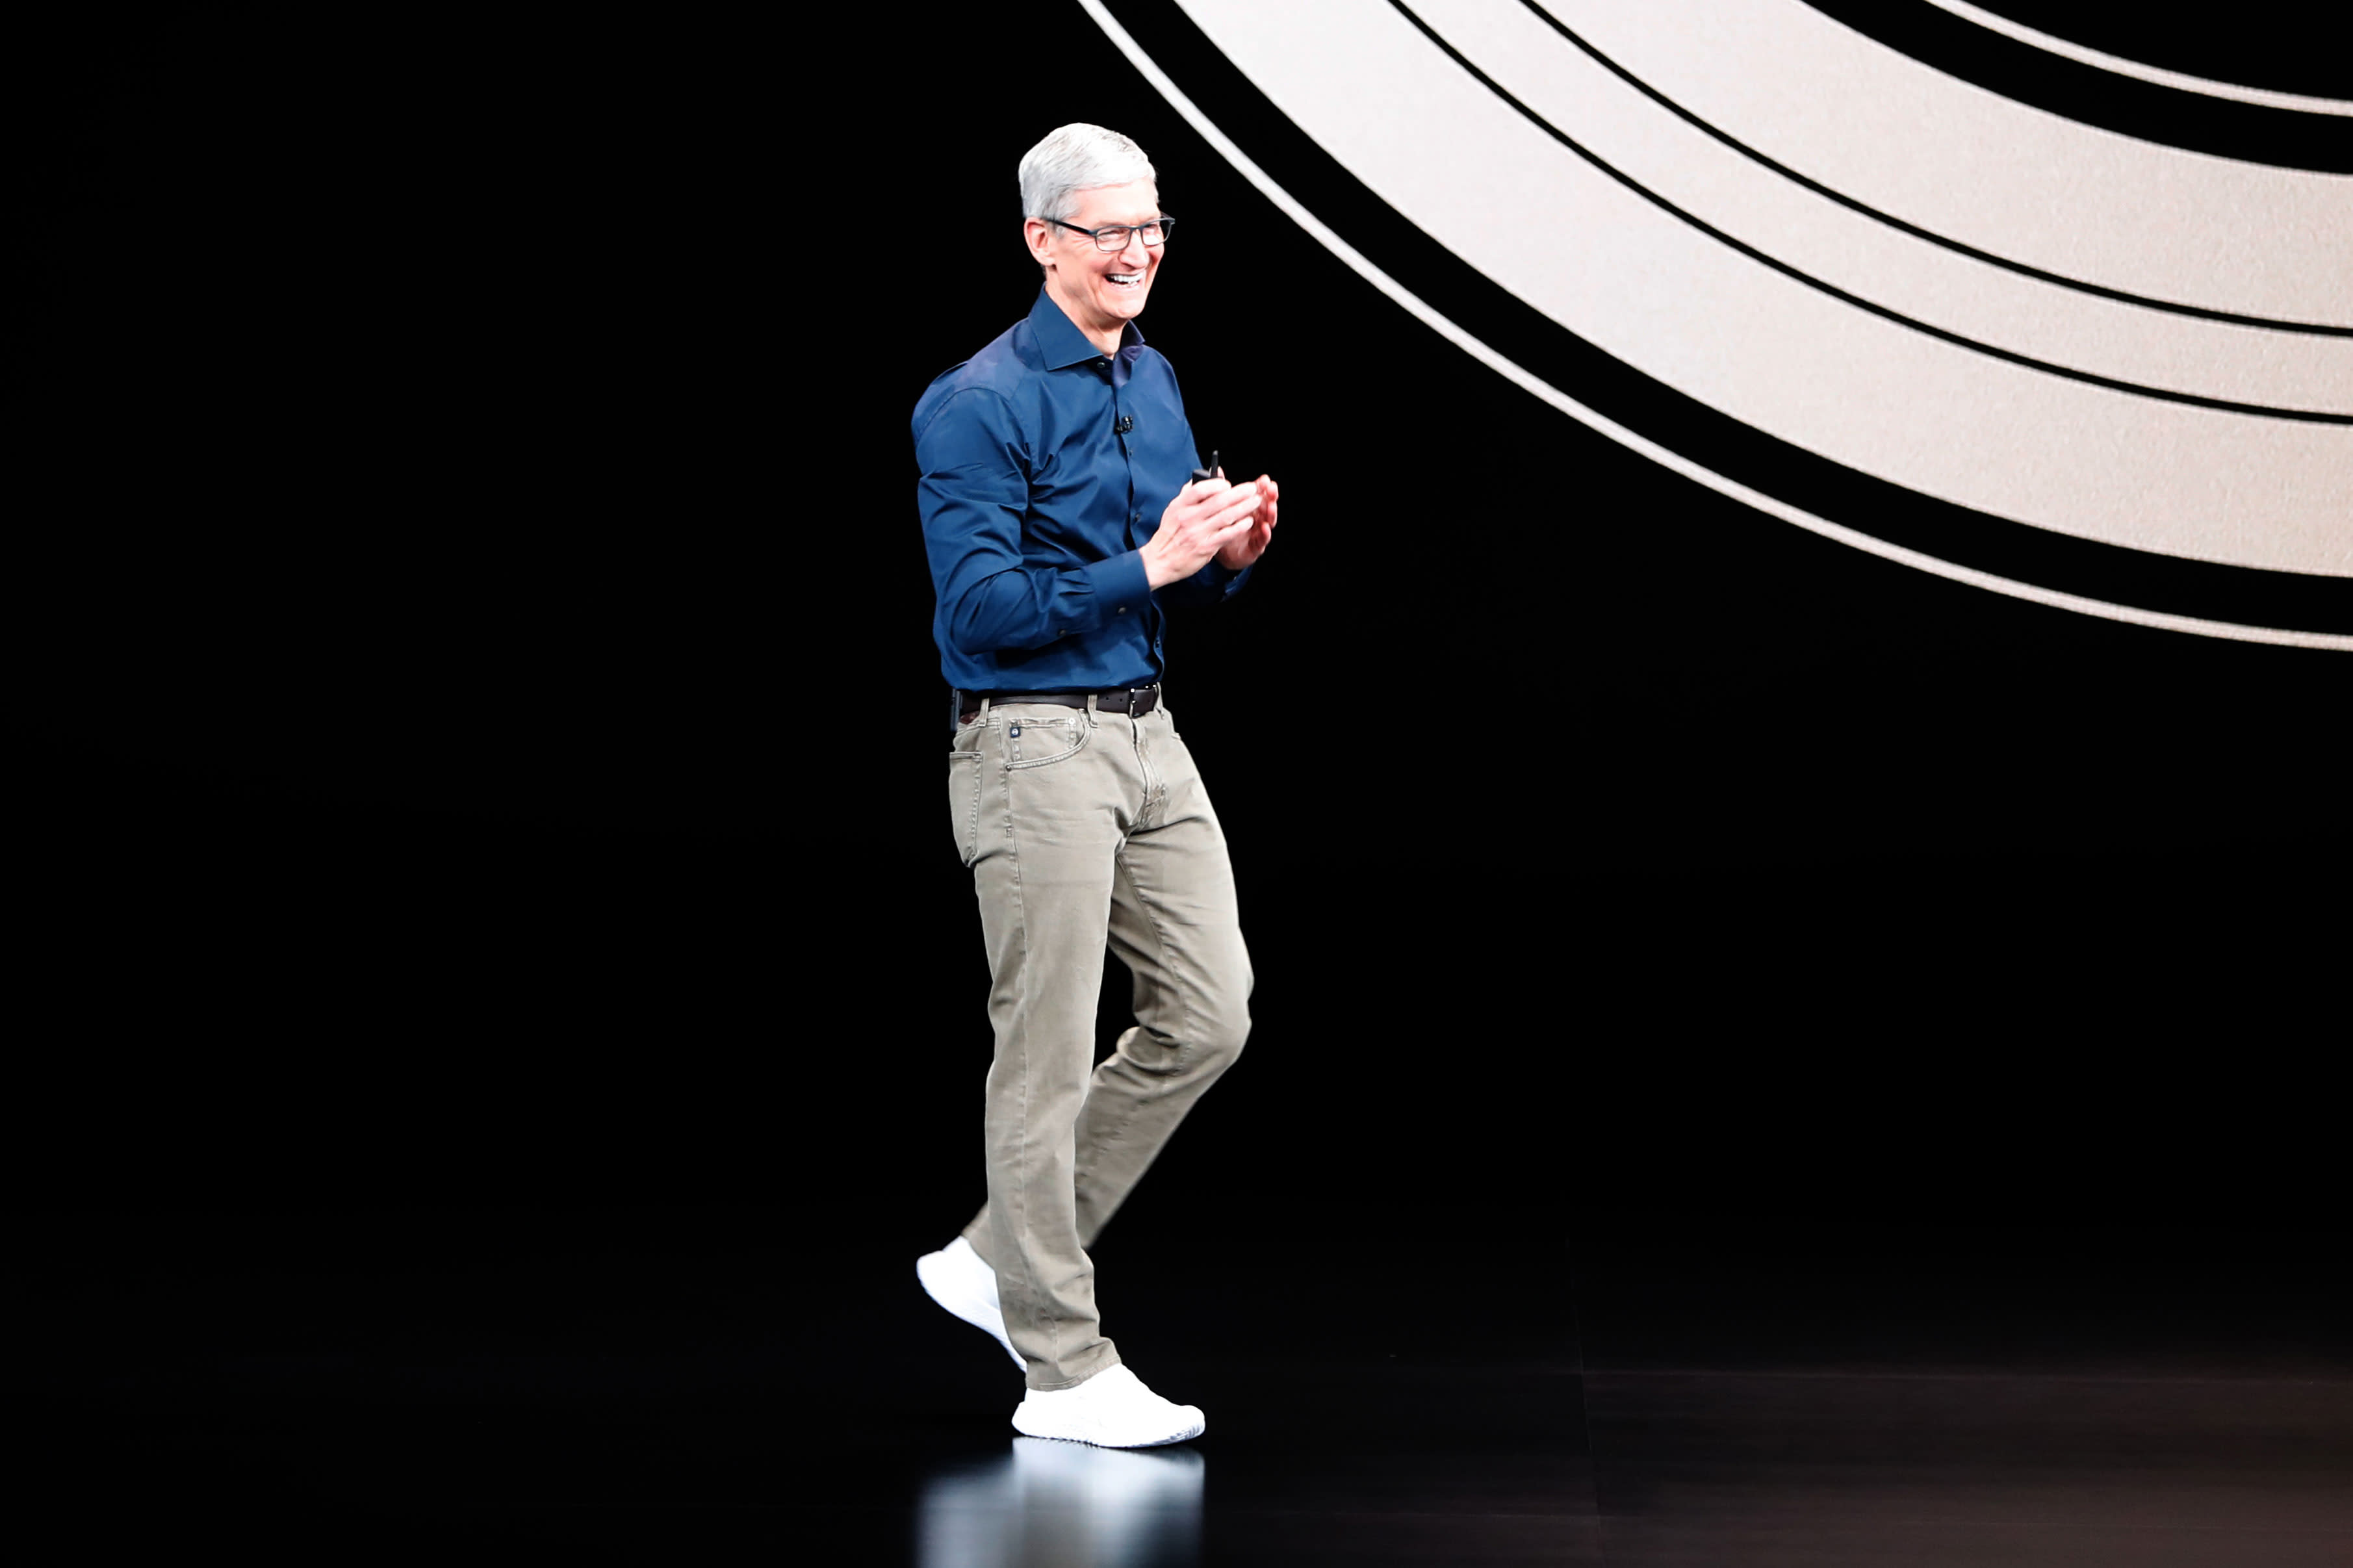 What major analysts say about Apple shares before the big event